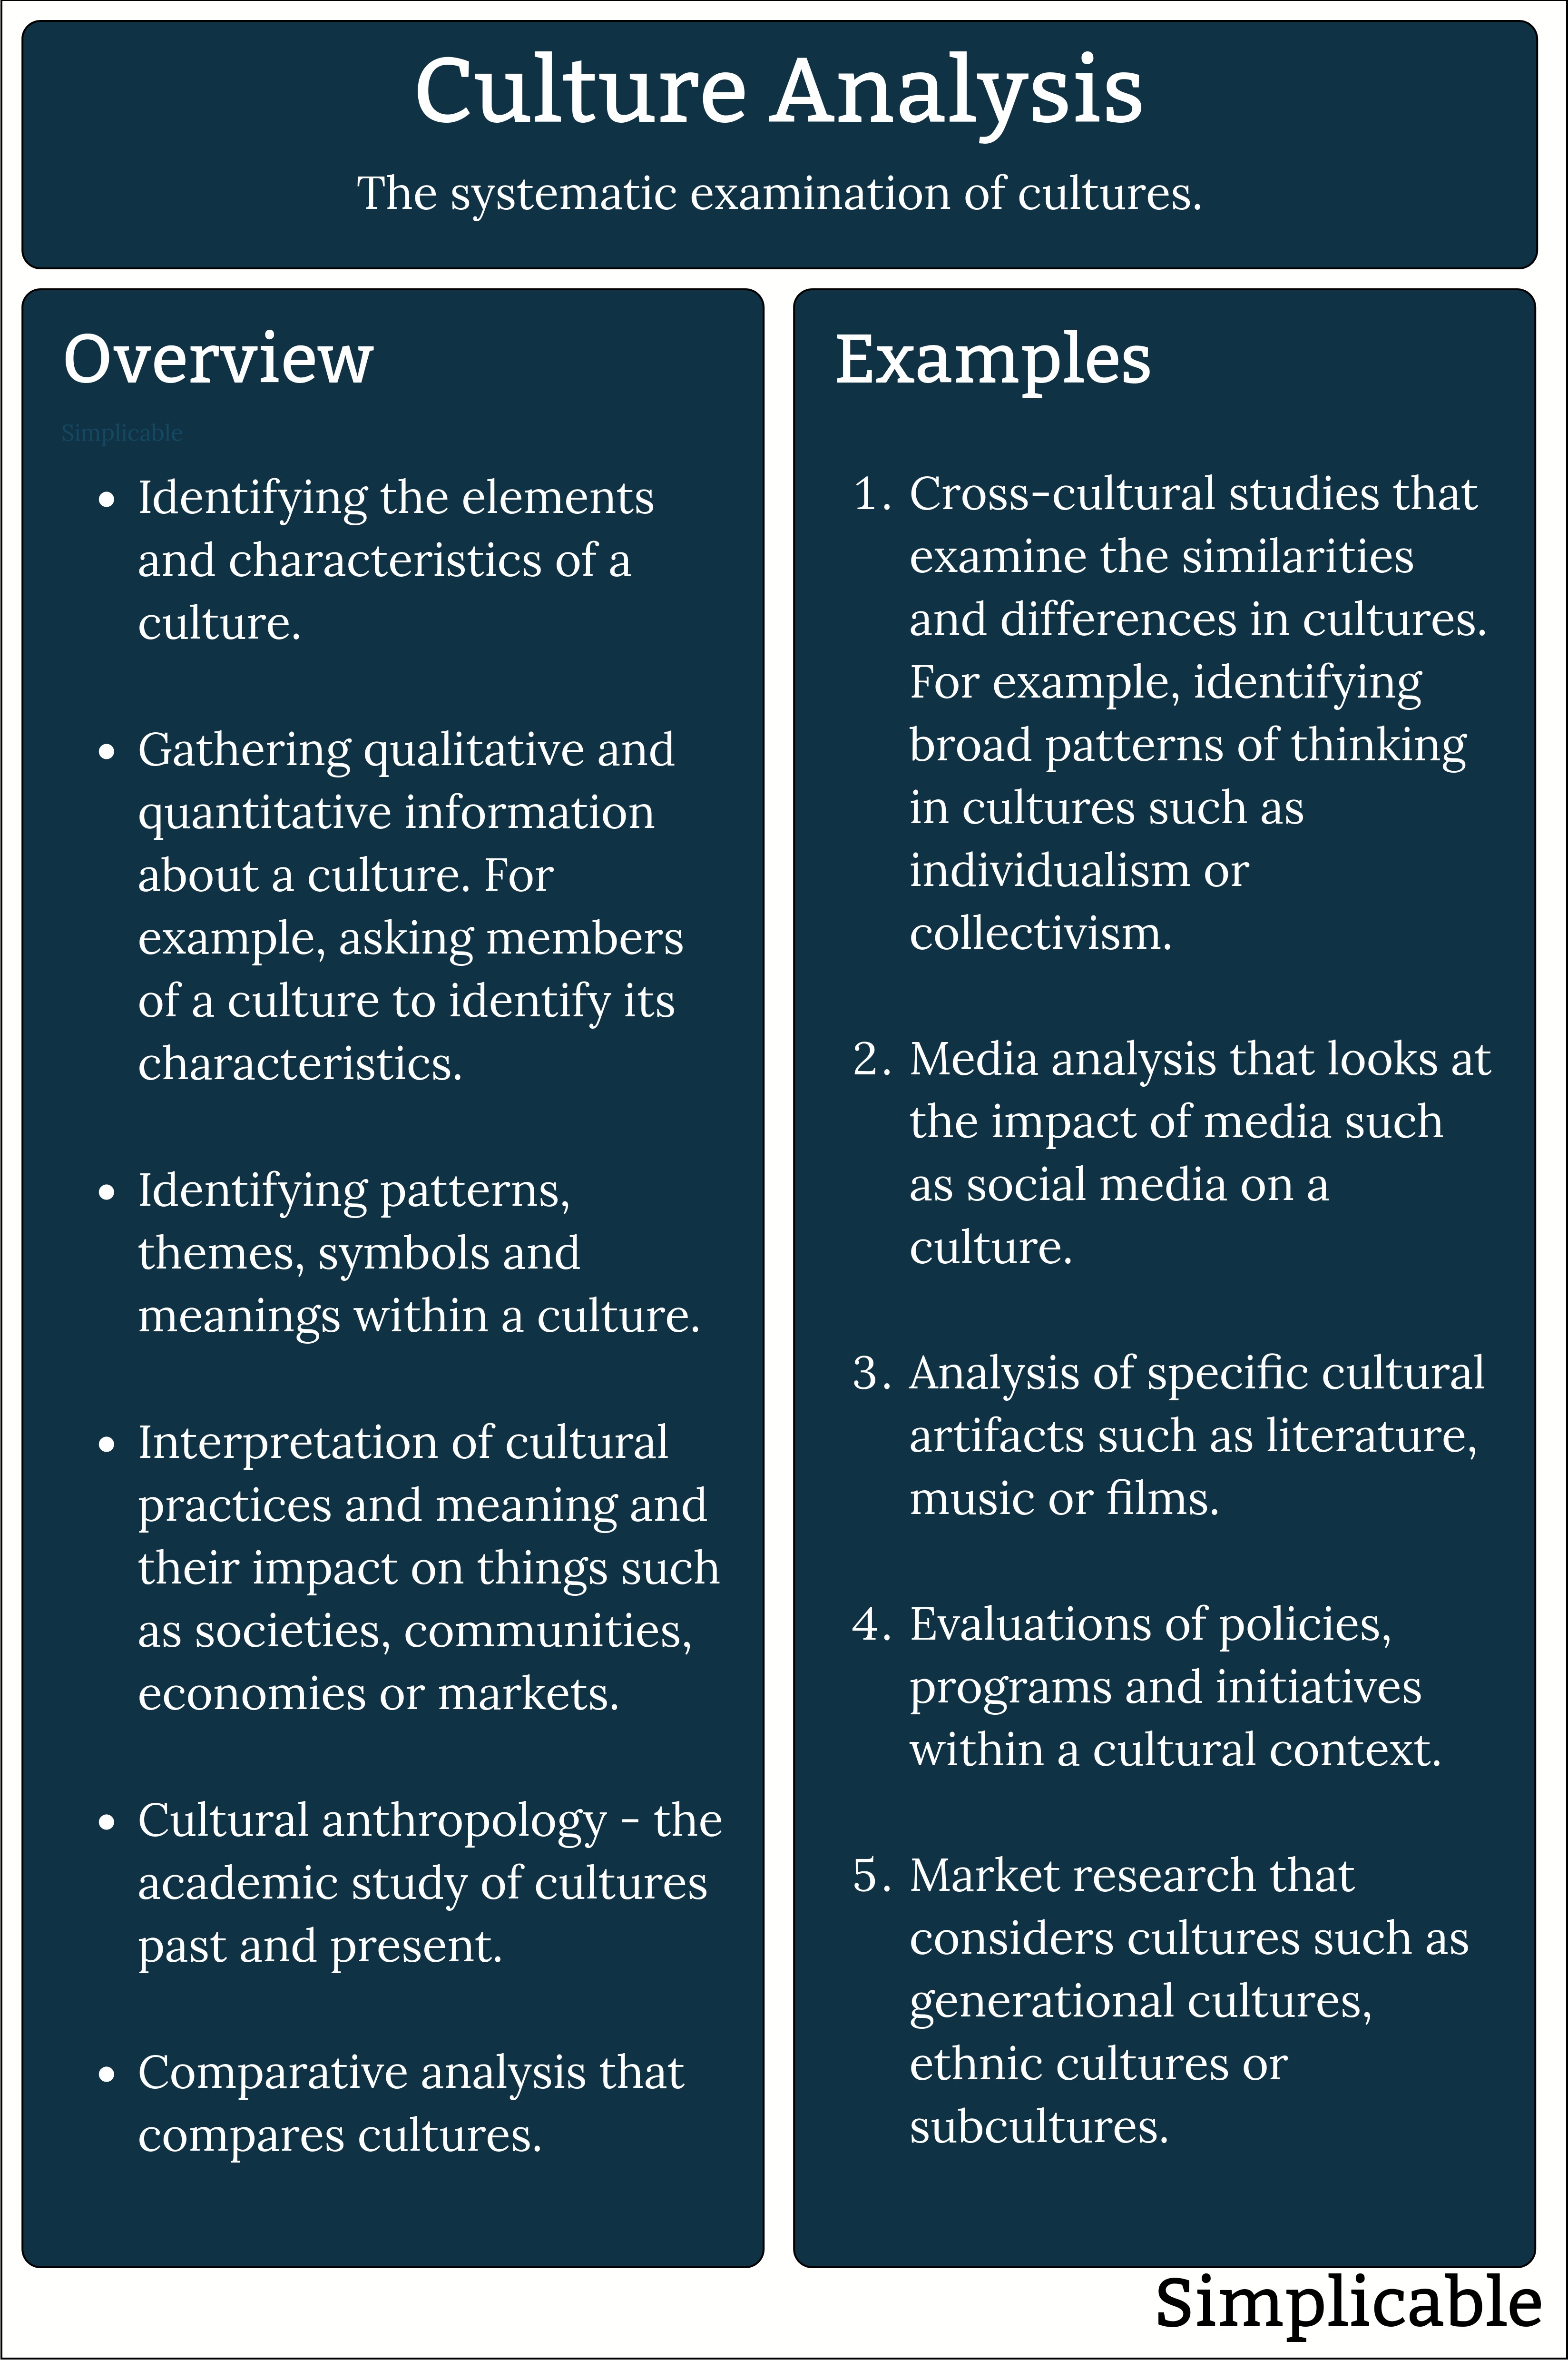 culture analysis overview and examples